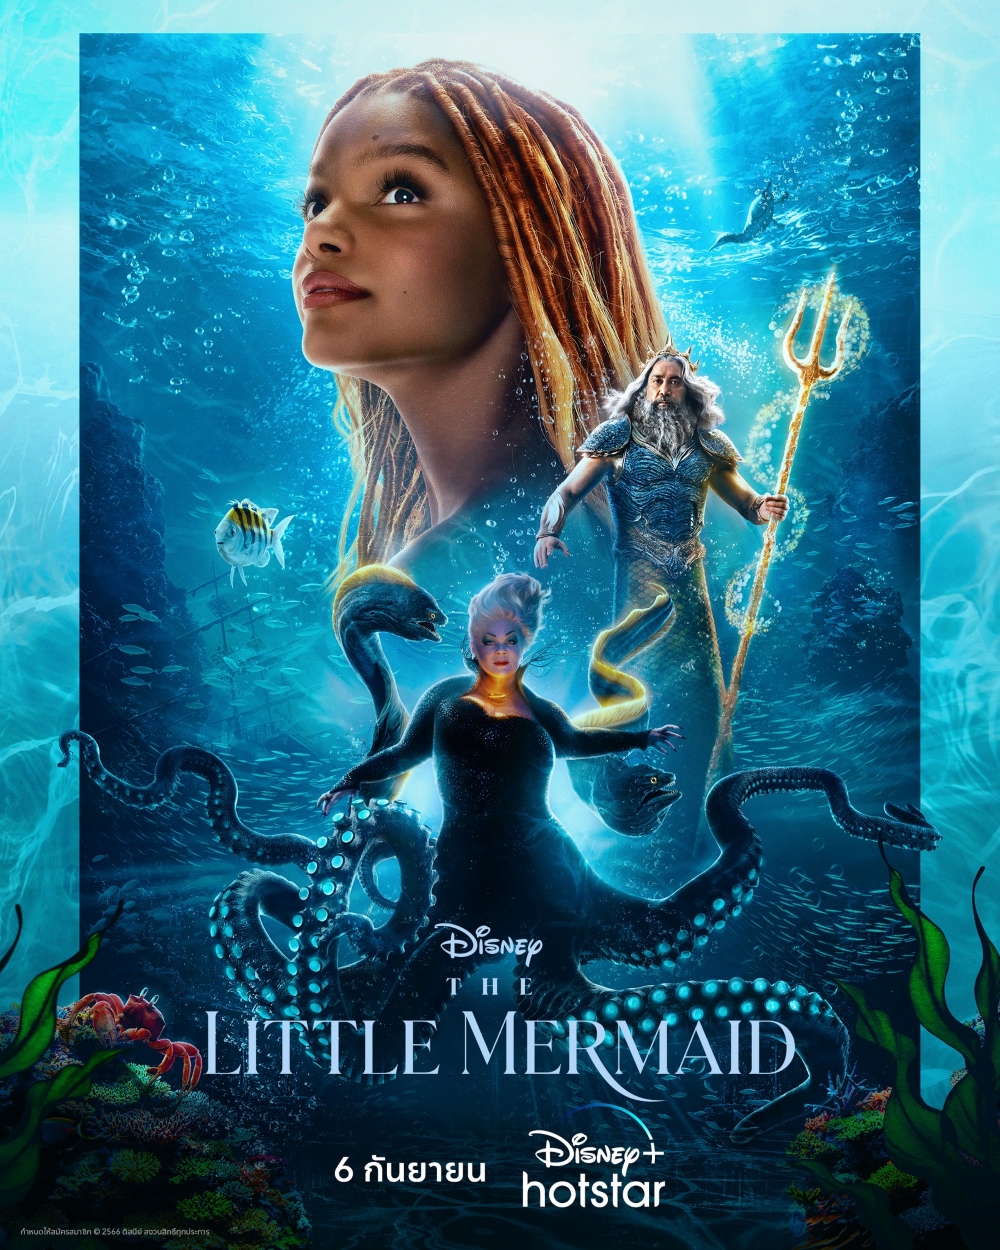 The Little Mermaid (Live-Action)